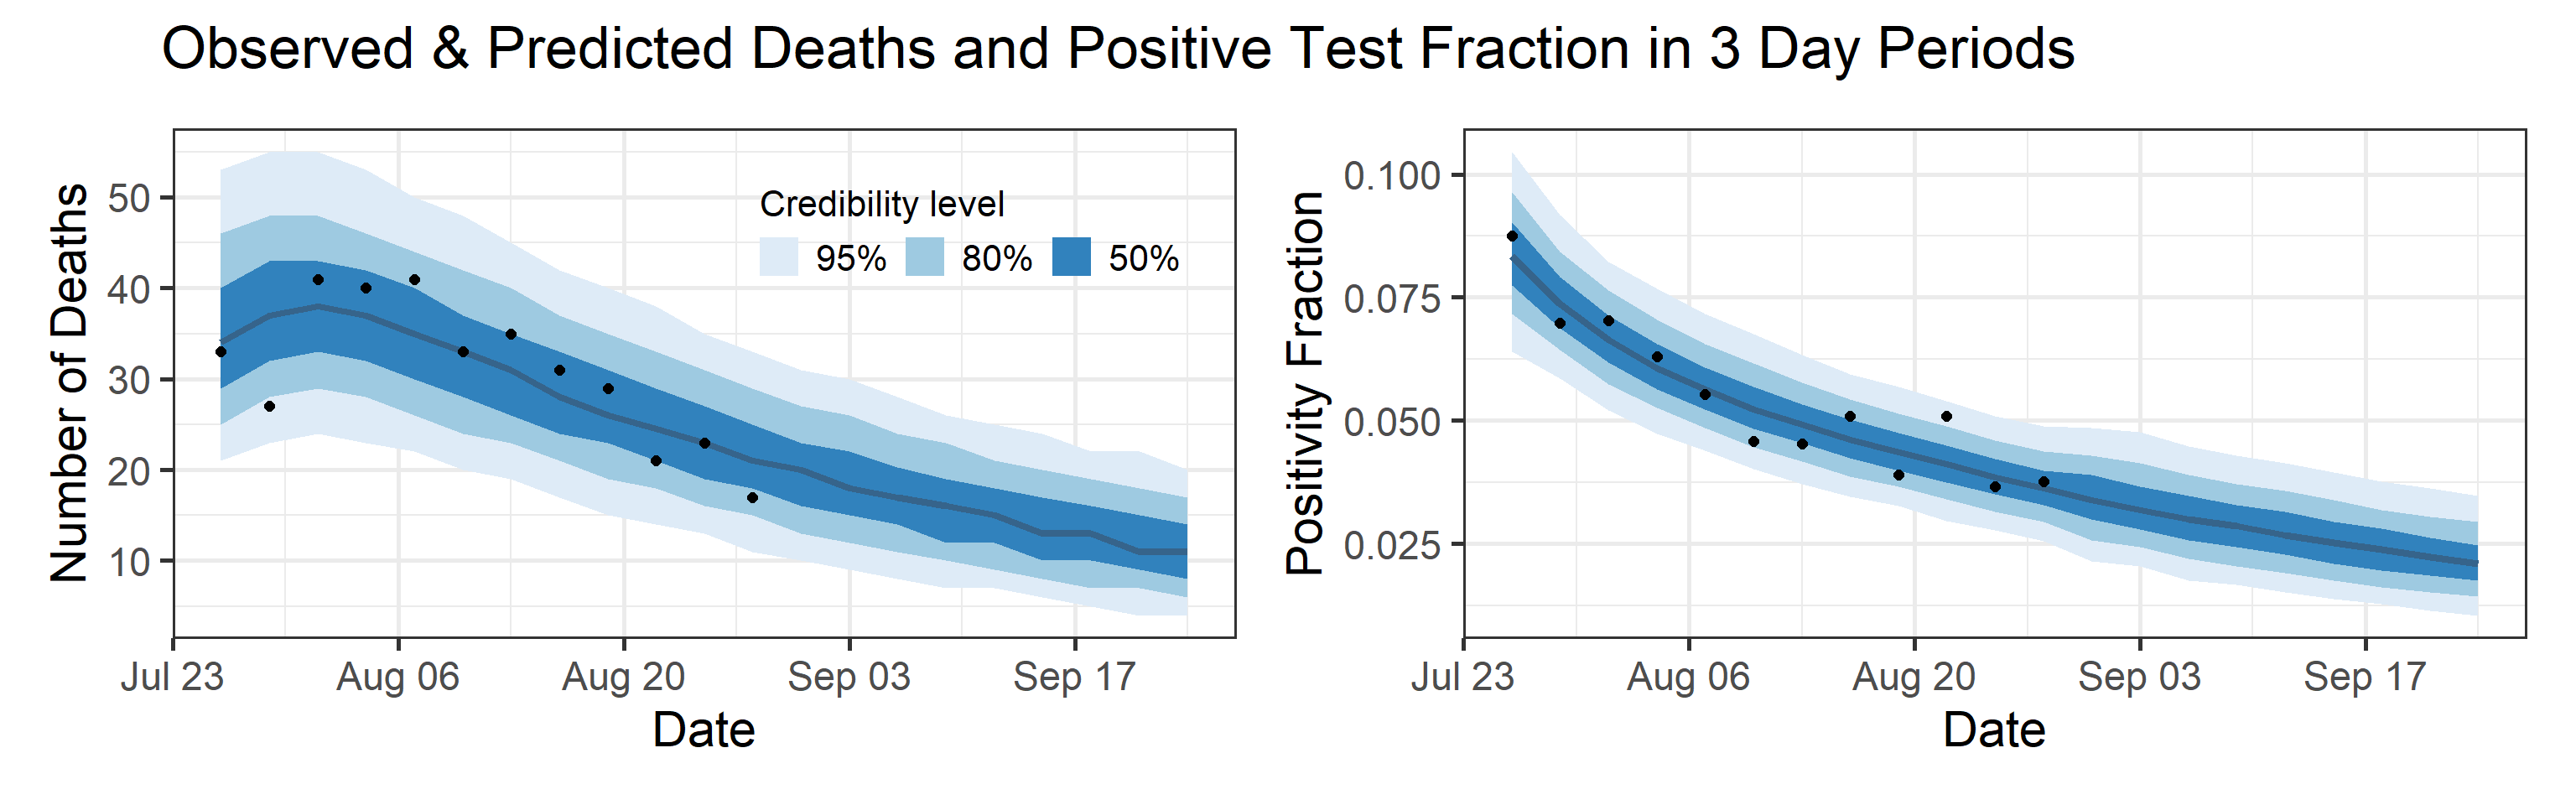 ppc-forecasts-1.png